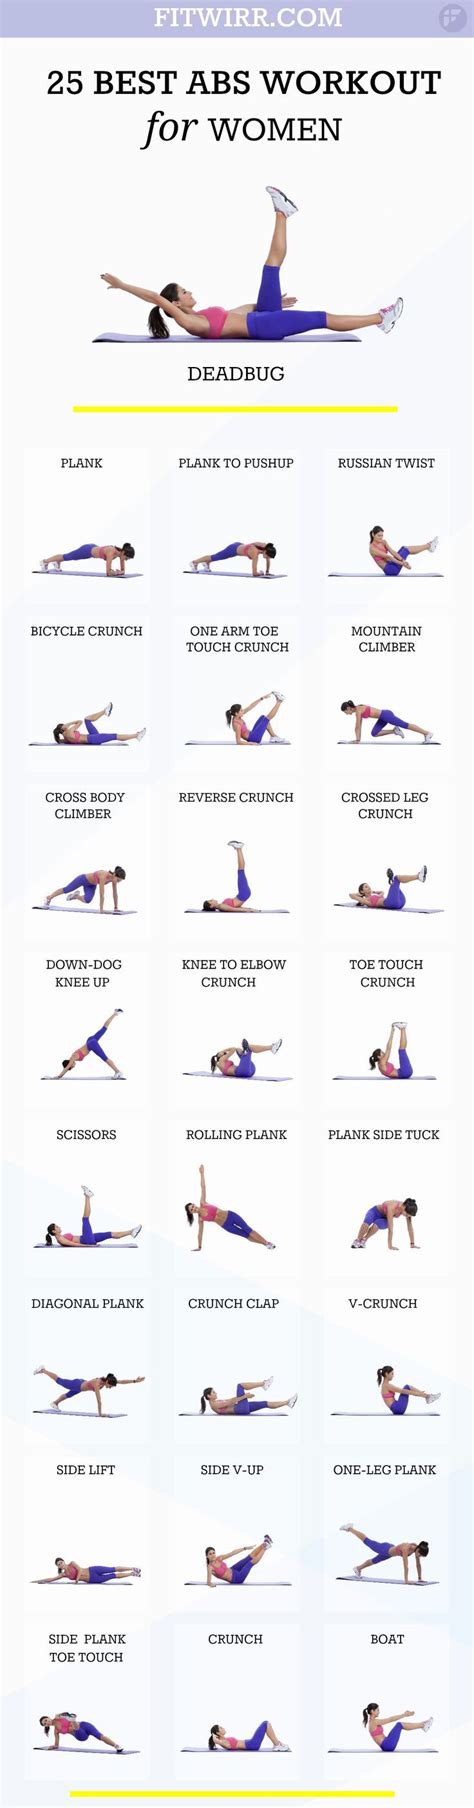 25 Best Ab Workouts For Women To Get A Flat Stomach Fitwirr Abs Workout For Women Abs